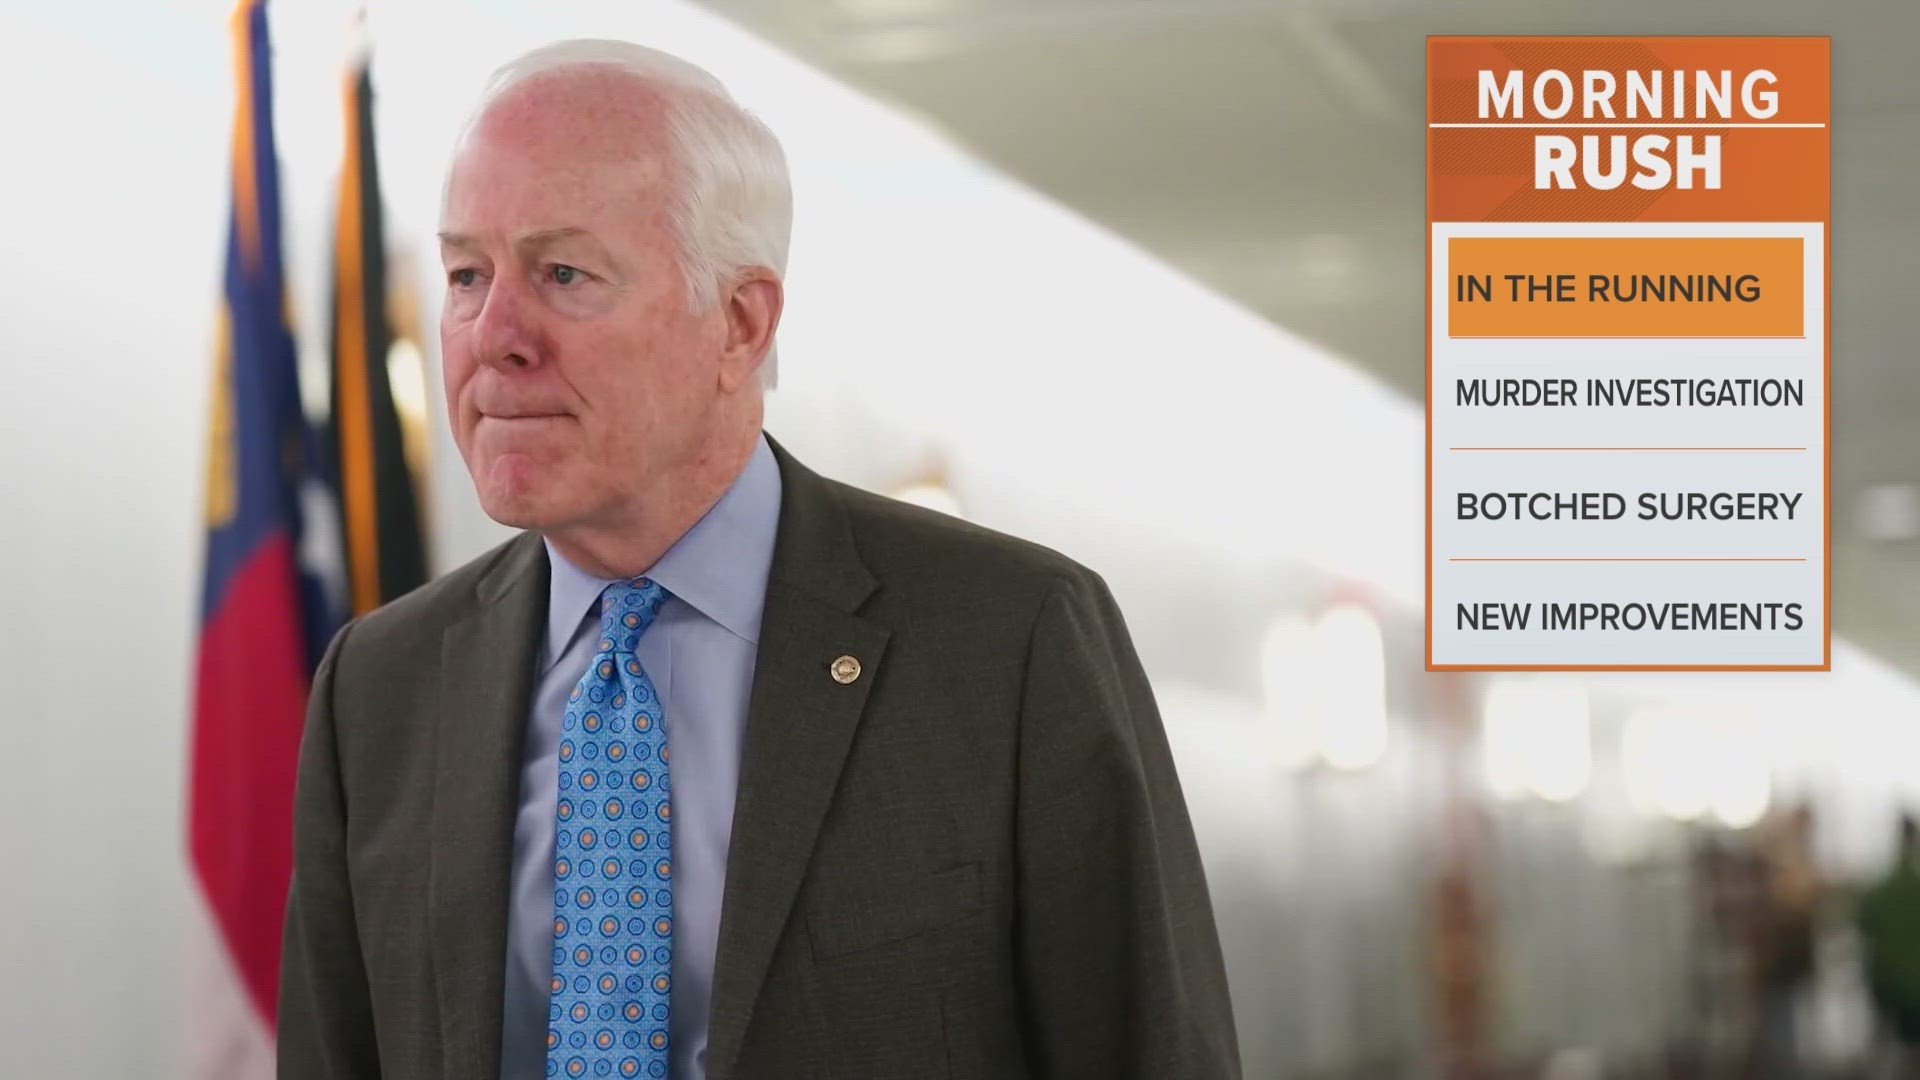 Sen. John Cornyn is the first senator to throw his hat in the ring to replace McConnell as the Republican leader.